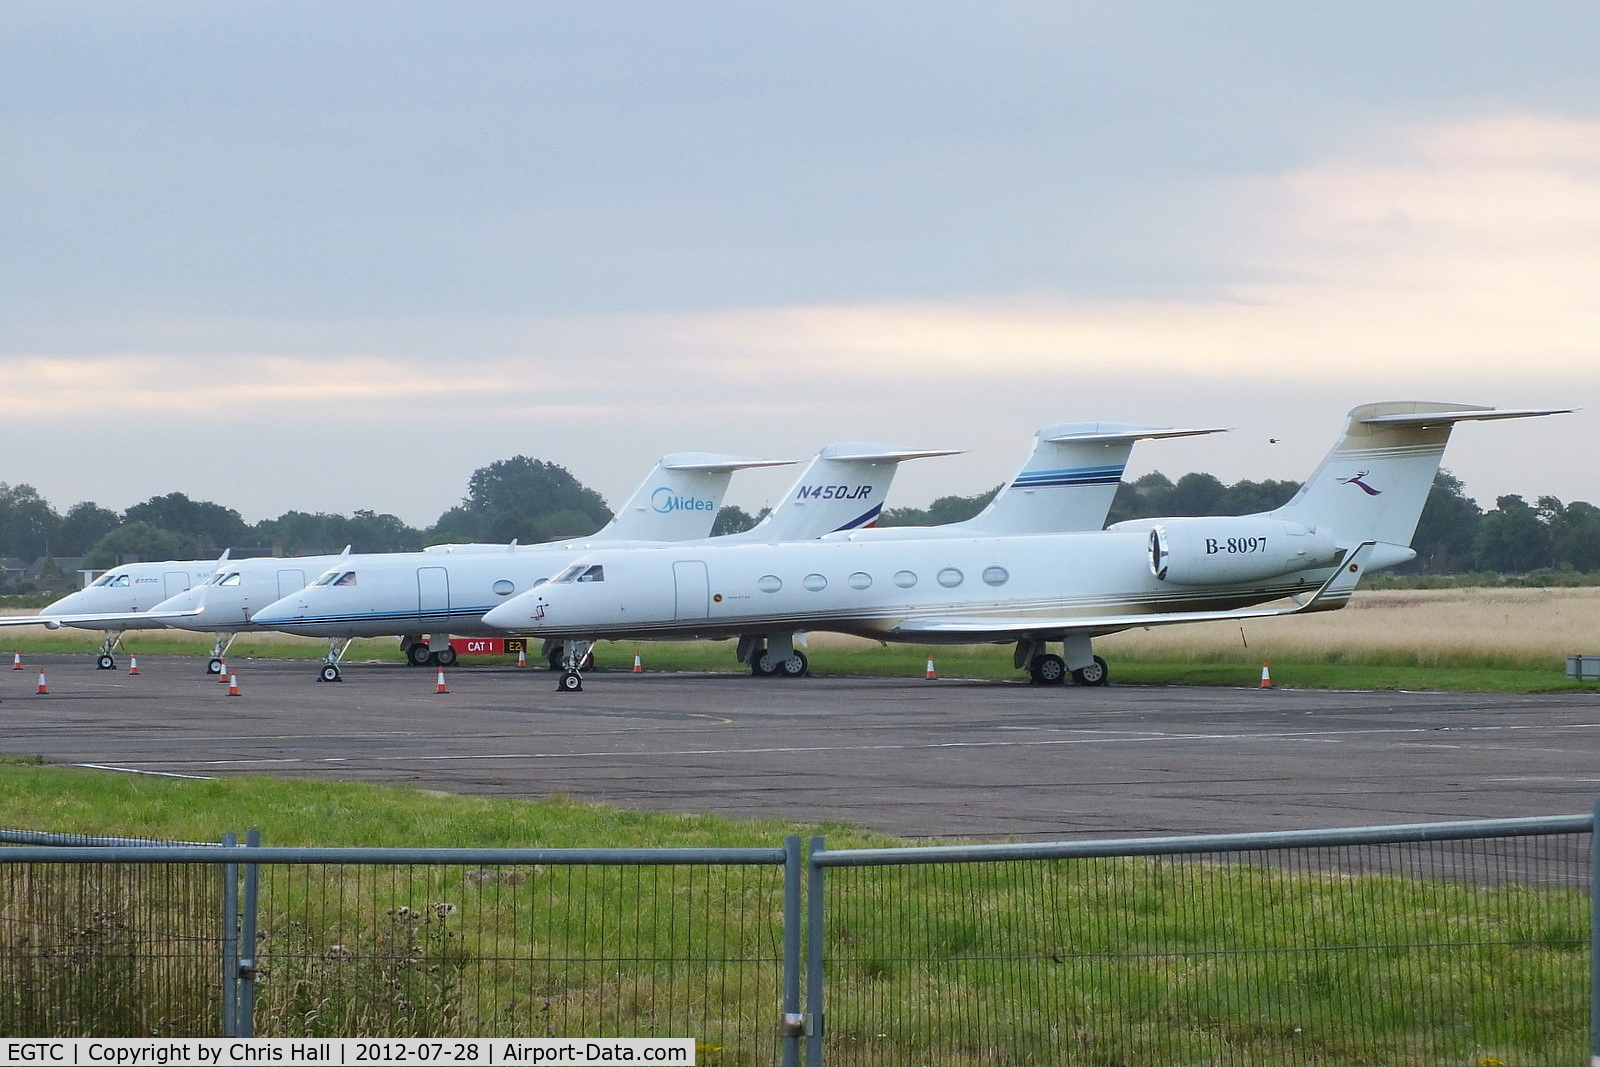 Cranfield Airport, Cranfield, England United Kingdom (EGTC) - bizjets parked at Cranfield with visitors for the opening of the London 2012 Olympic games. From L to R are B-8098, N450JR, N780W and B-8097